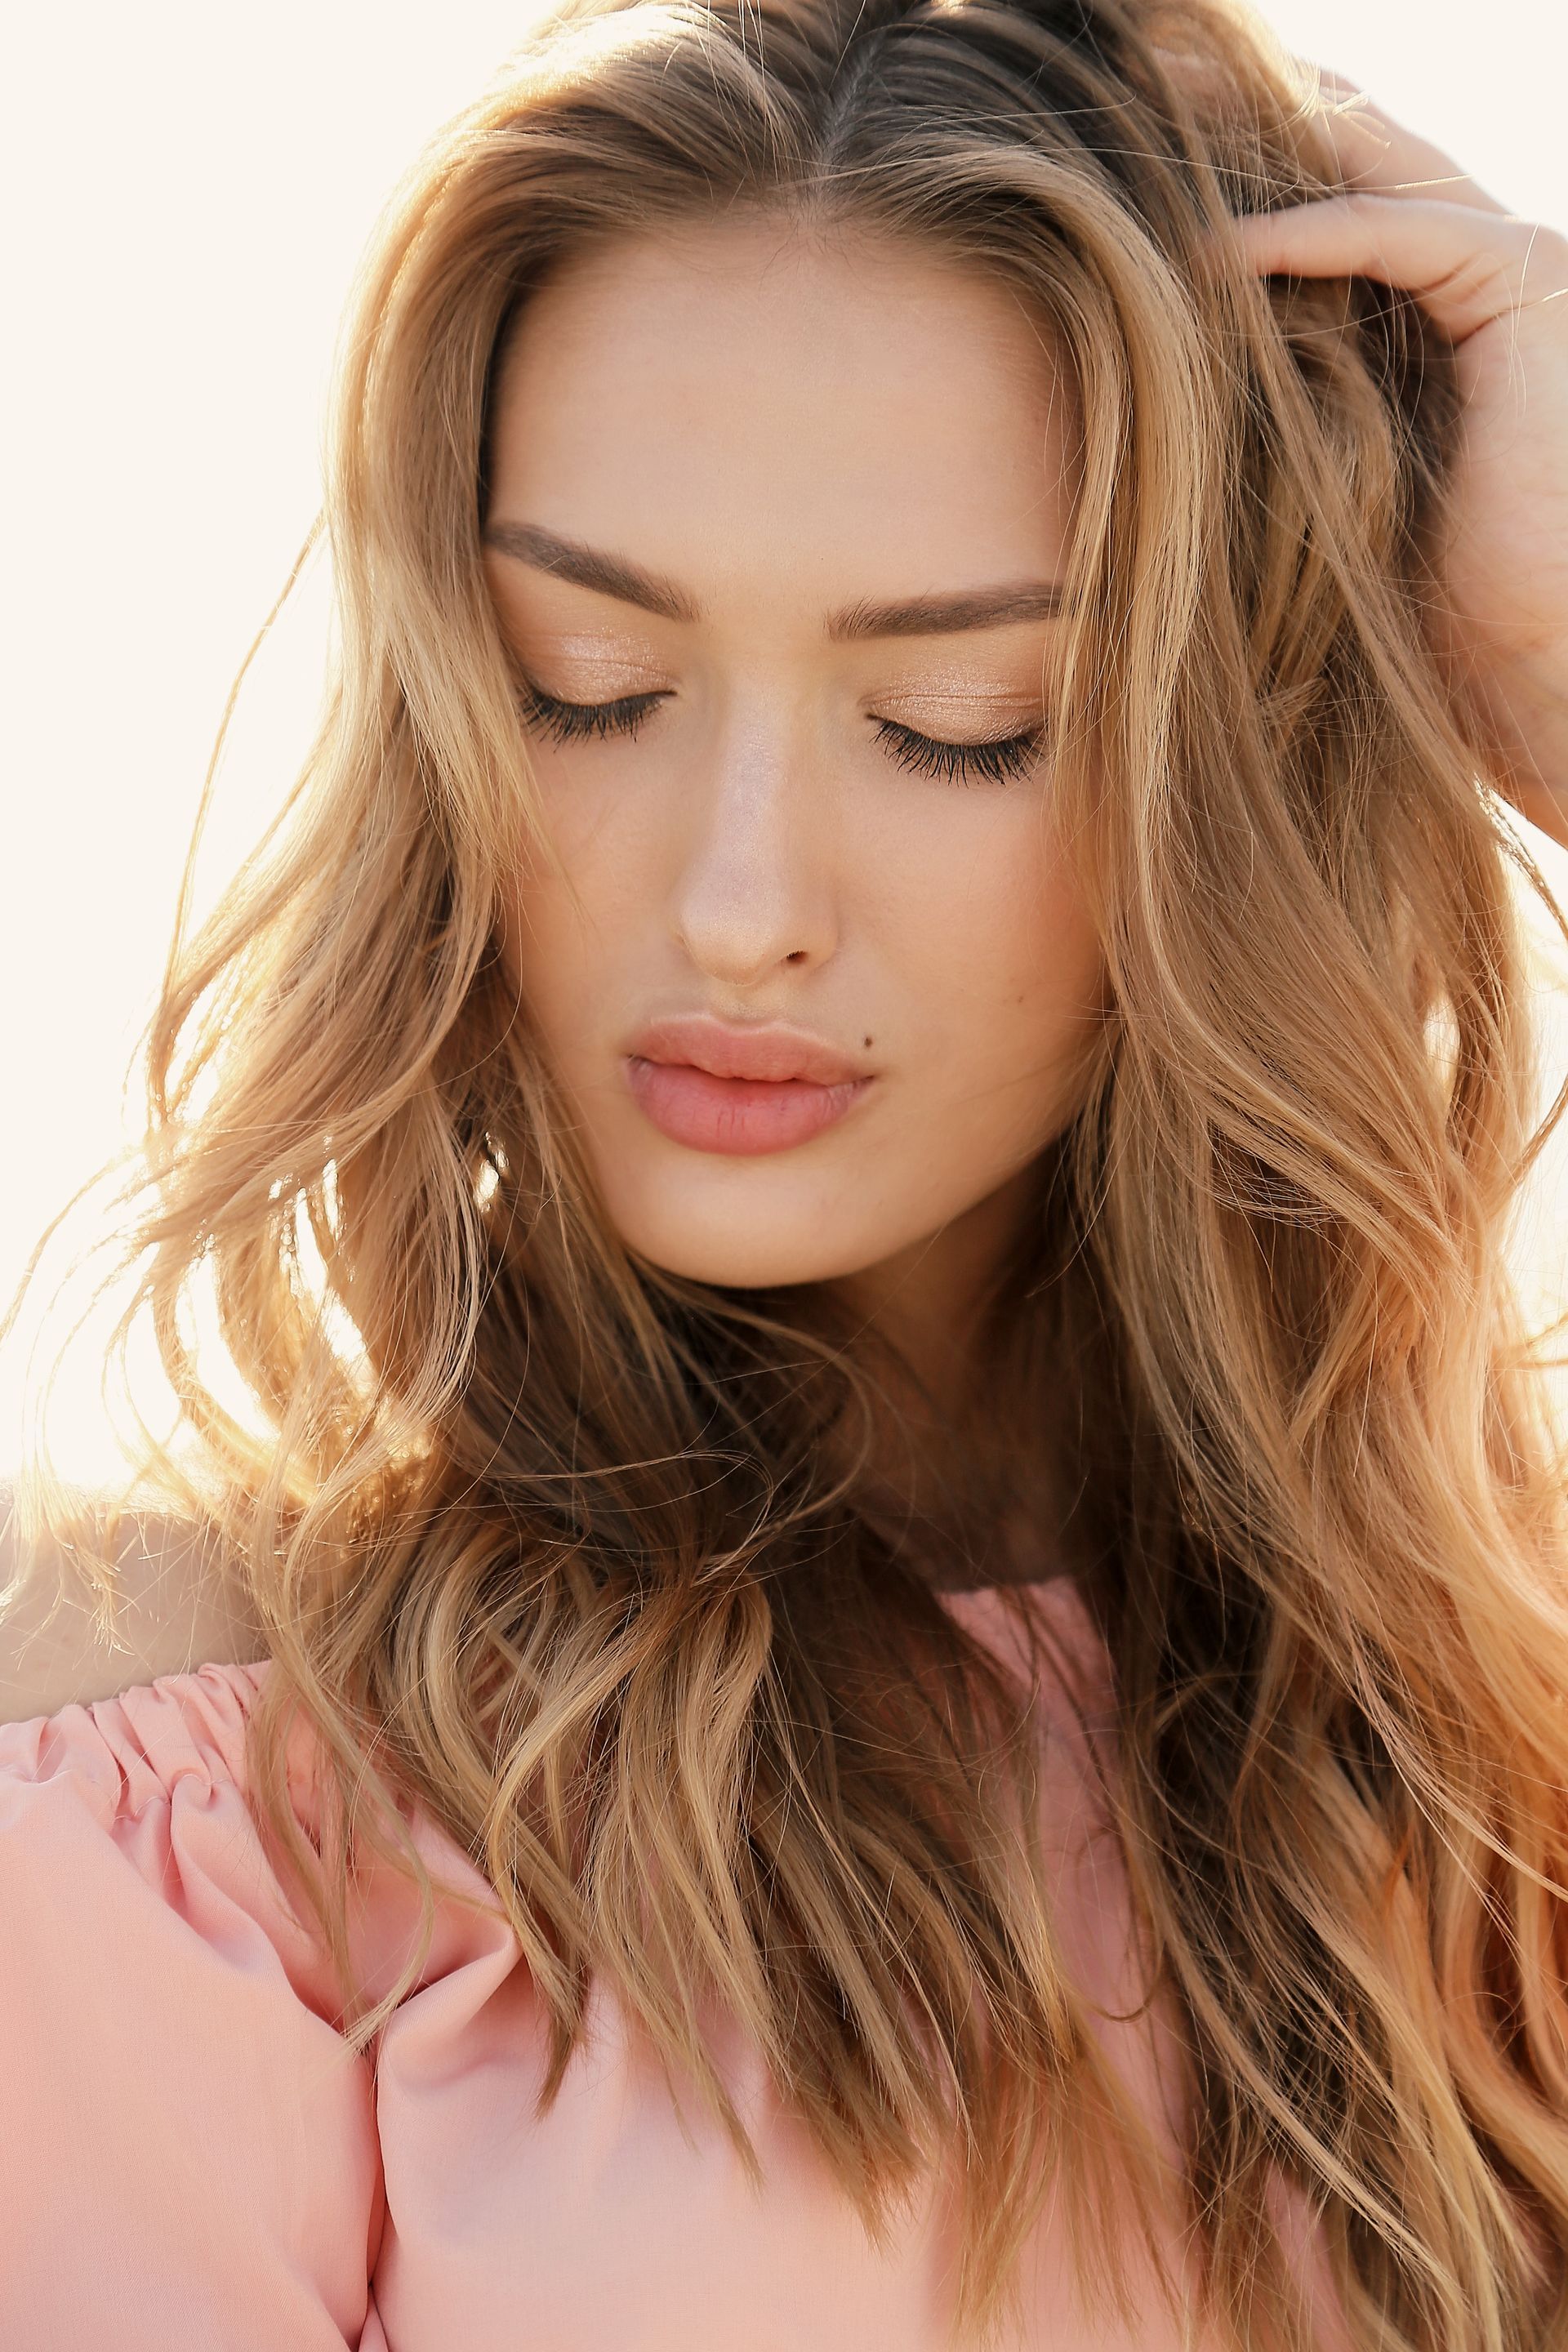 a close up of a woman 's face with her eyes closed and her hair blowing in the wind .